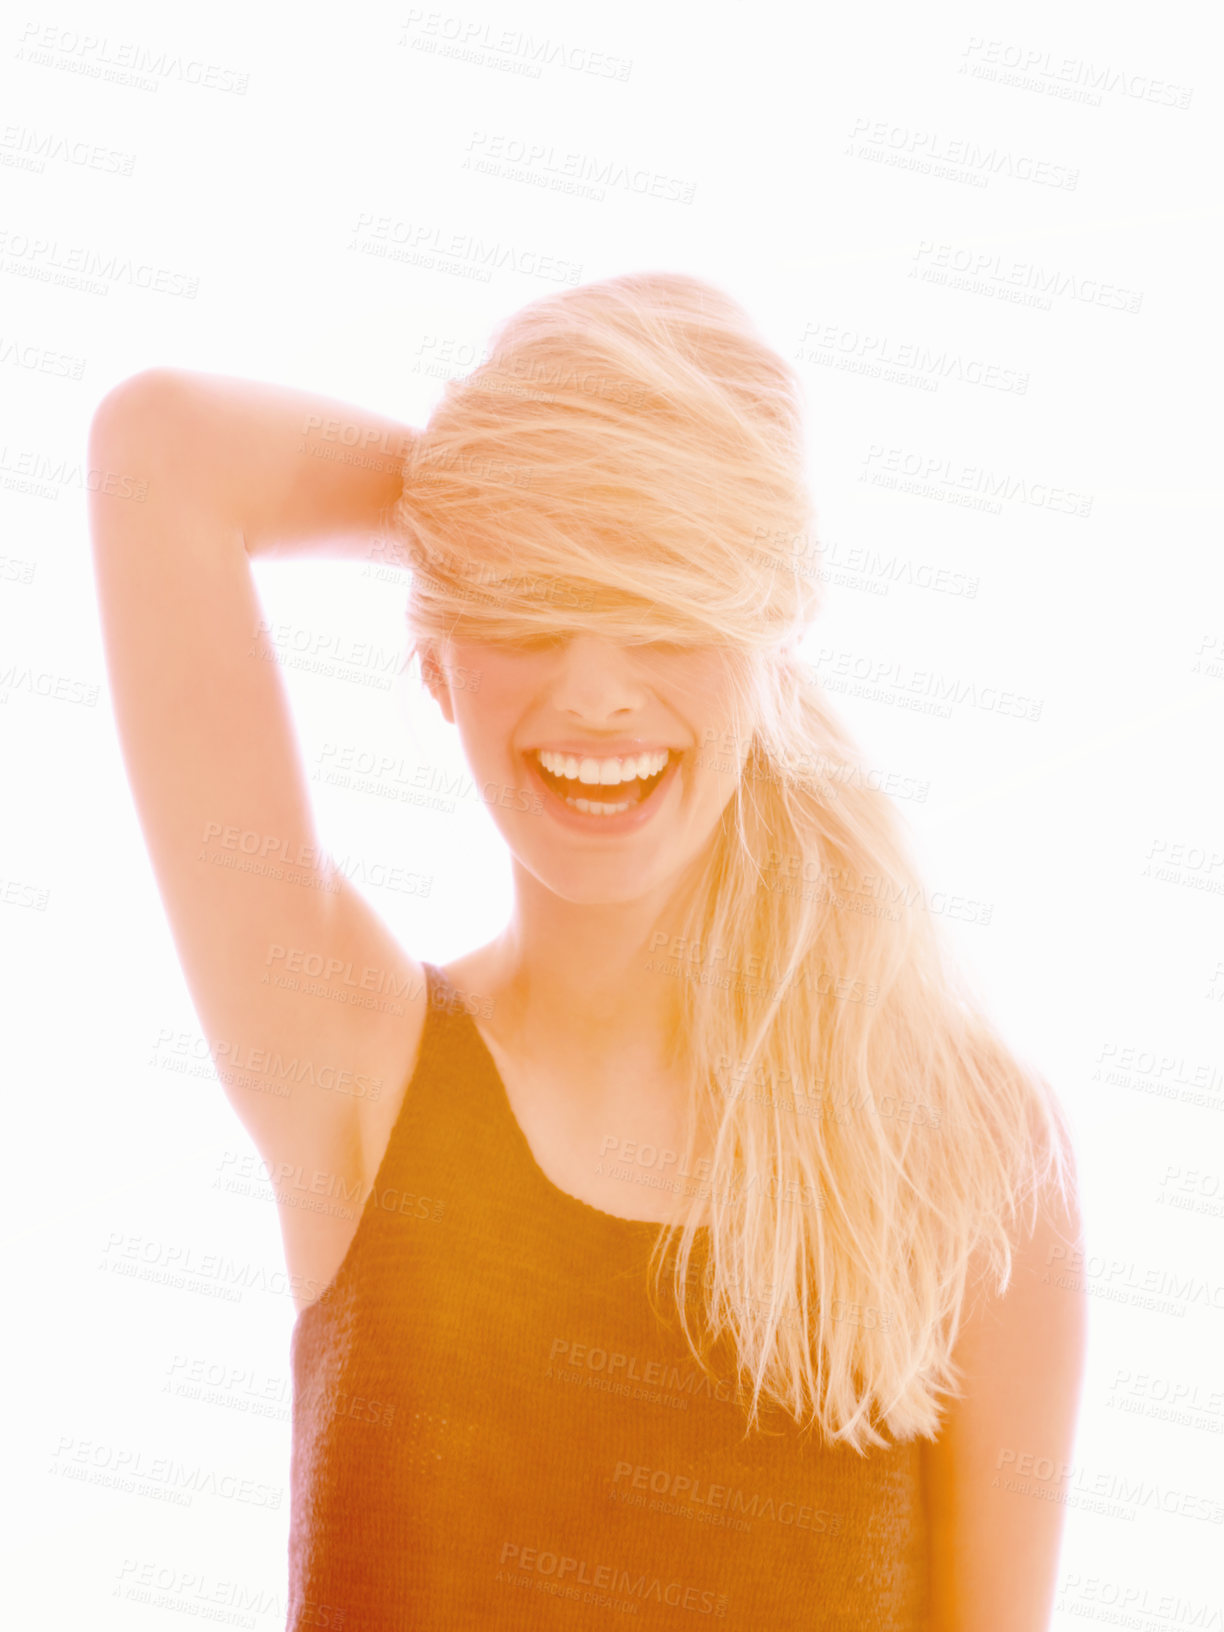 Buy stock photo A young woman laughing with her hair covering her eyes